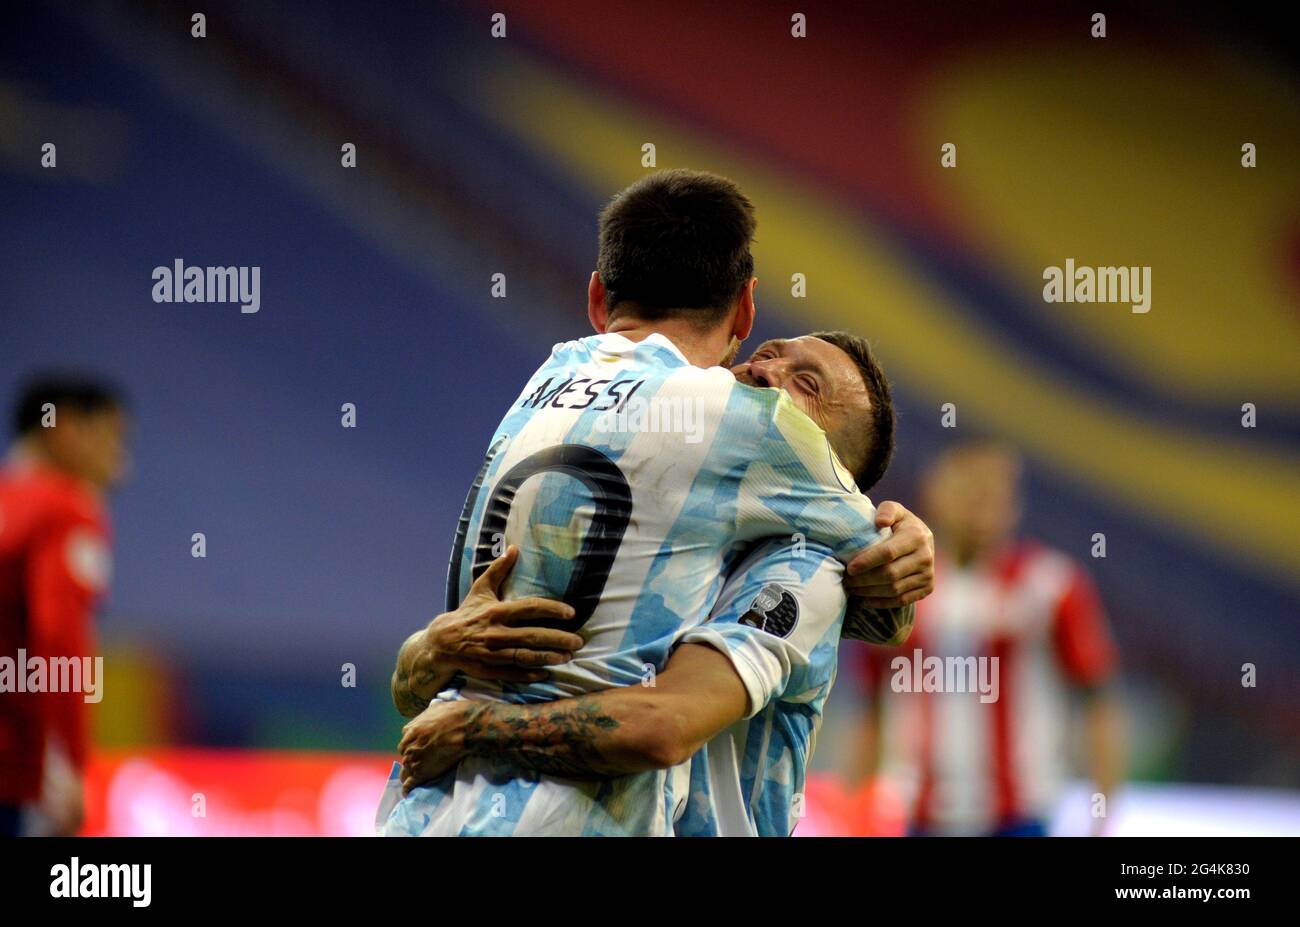 BRASILIA, BRAZIL - JUNE 21: Alejandro Papu Gomez of Argentina celebrates with his team mates Lionel Messi after scores his gol ,during the match between Argentina and Paraguay at Mane Garrincha Stadium on June 21, 2021 in Brasilia, Brazil. (MB Media) Stock Photo